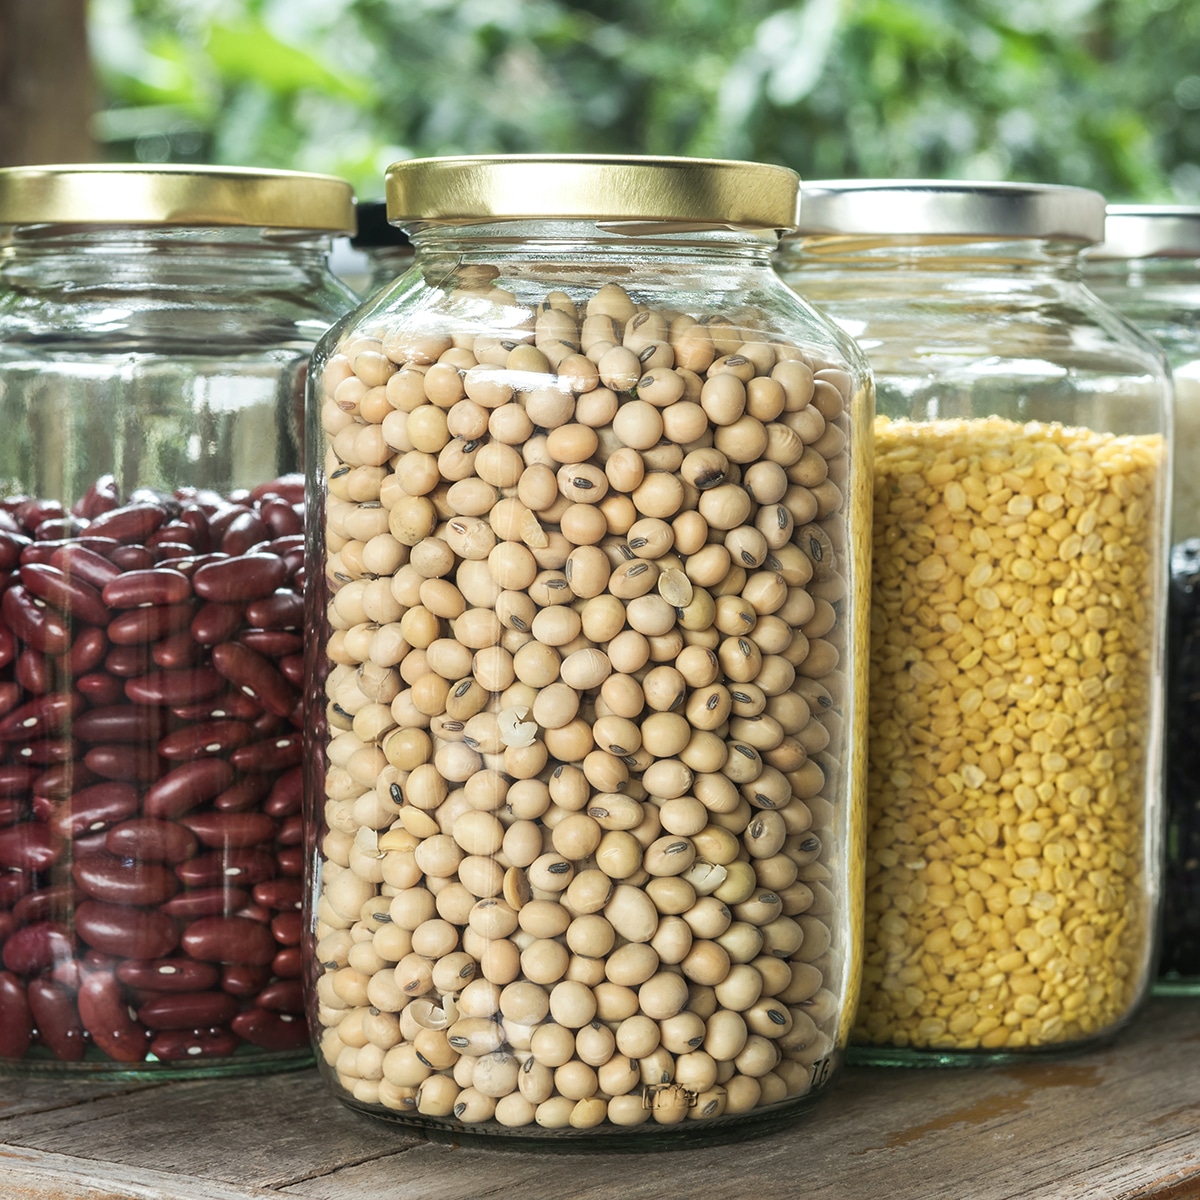 Several jars of dried beans, lentils, and rice on a kitchen pantry shelf.